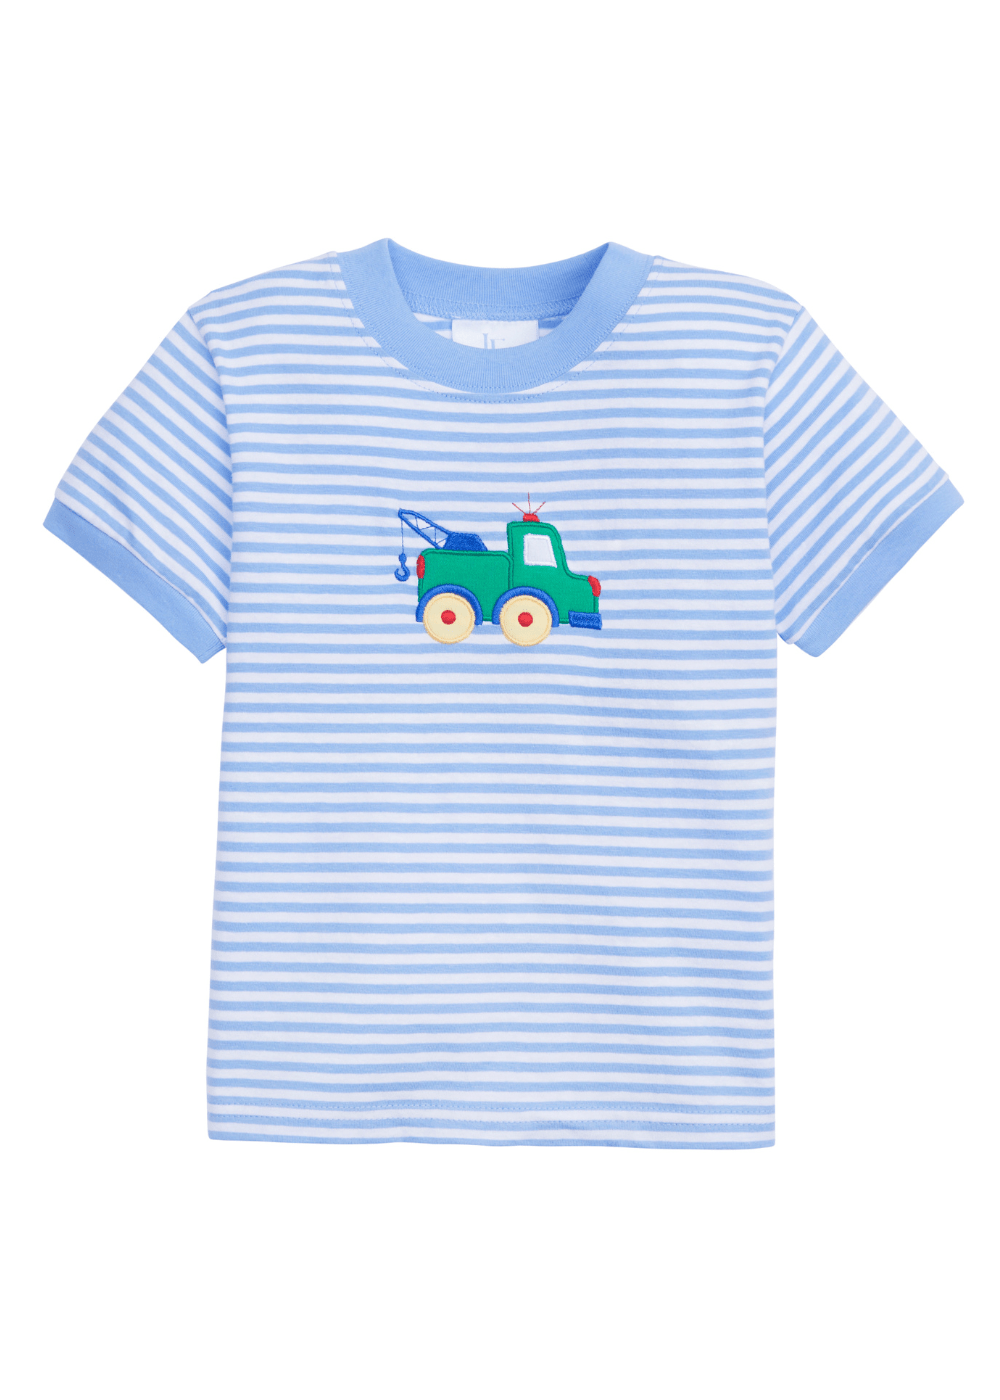 classic childrens clothing boys blue and white striped t-shirt with applique tow truck